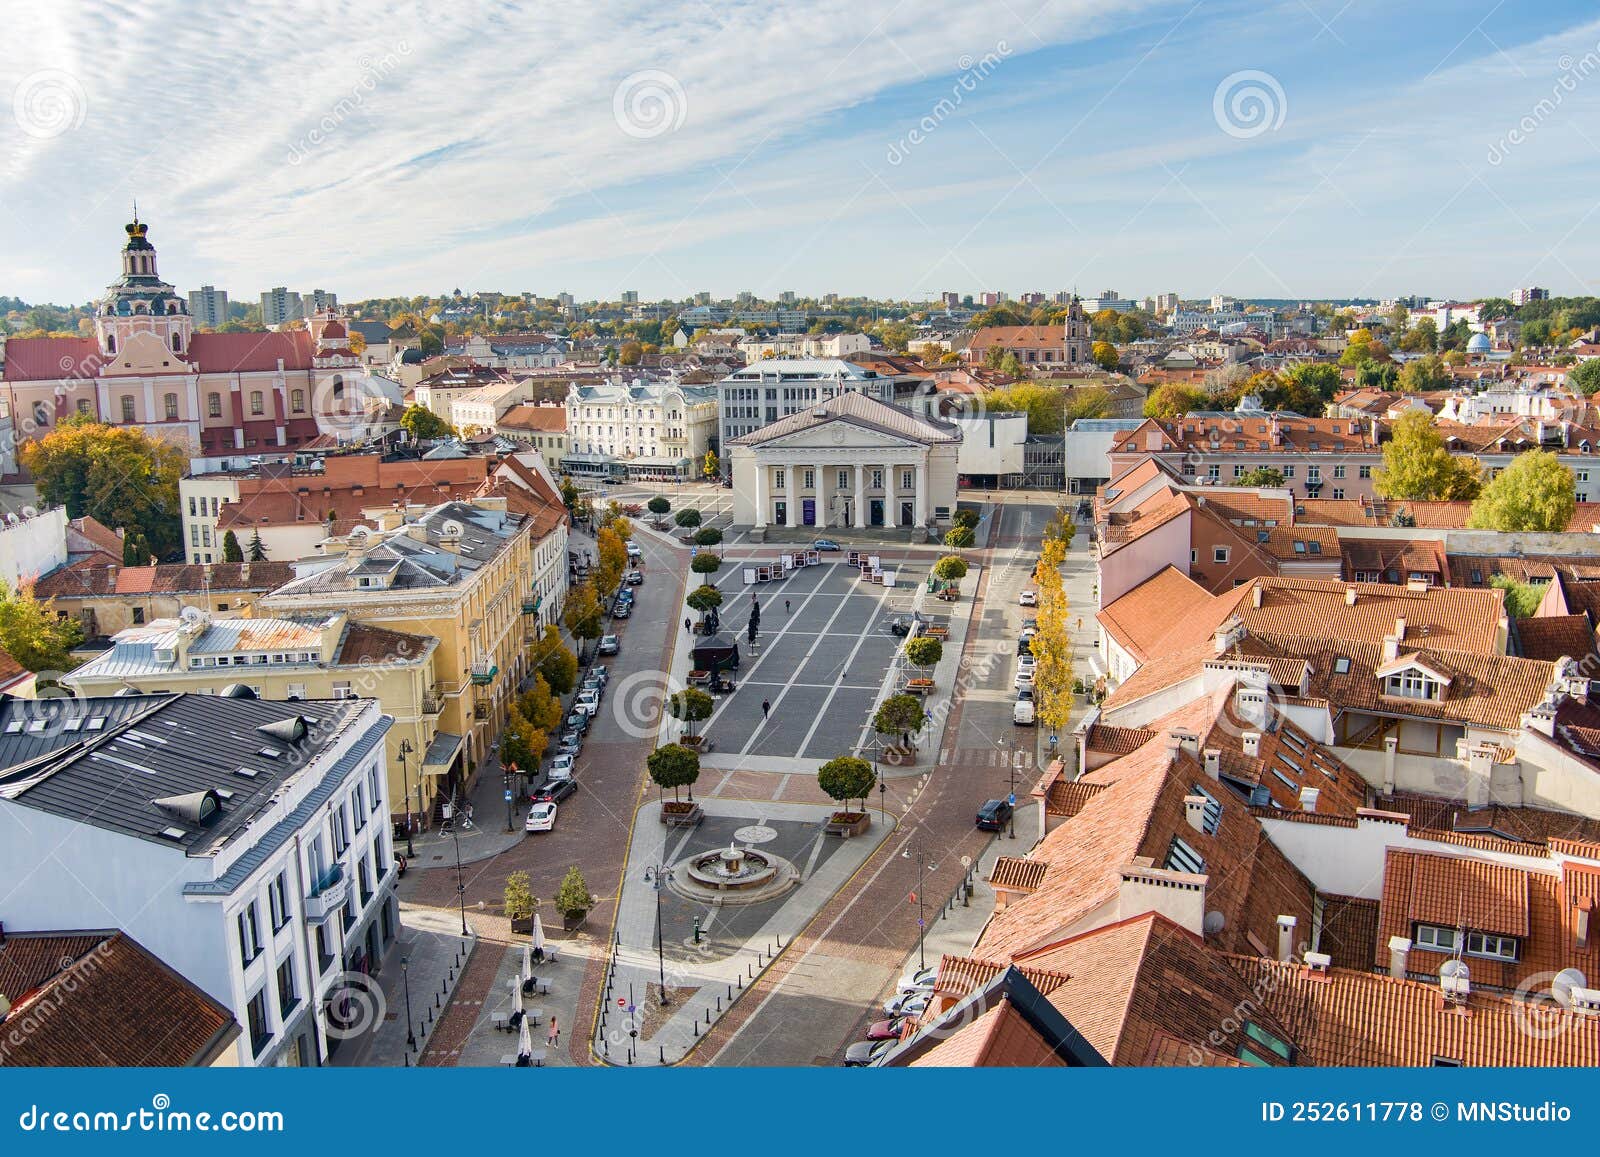 aerial view of the town hall square at the end of the pilies street in vilnius. beautiful autumn day in the capital of lithuania